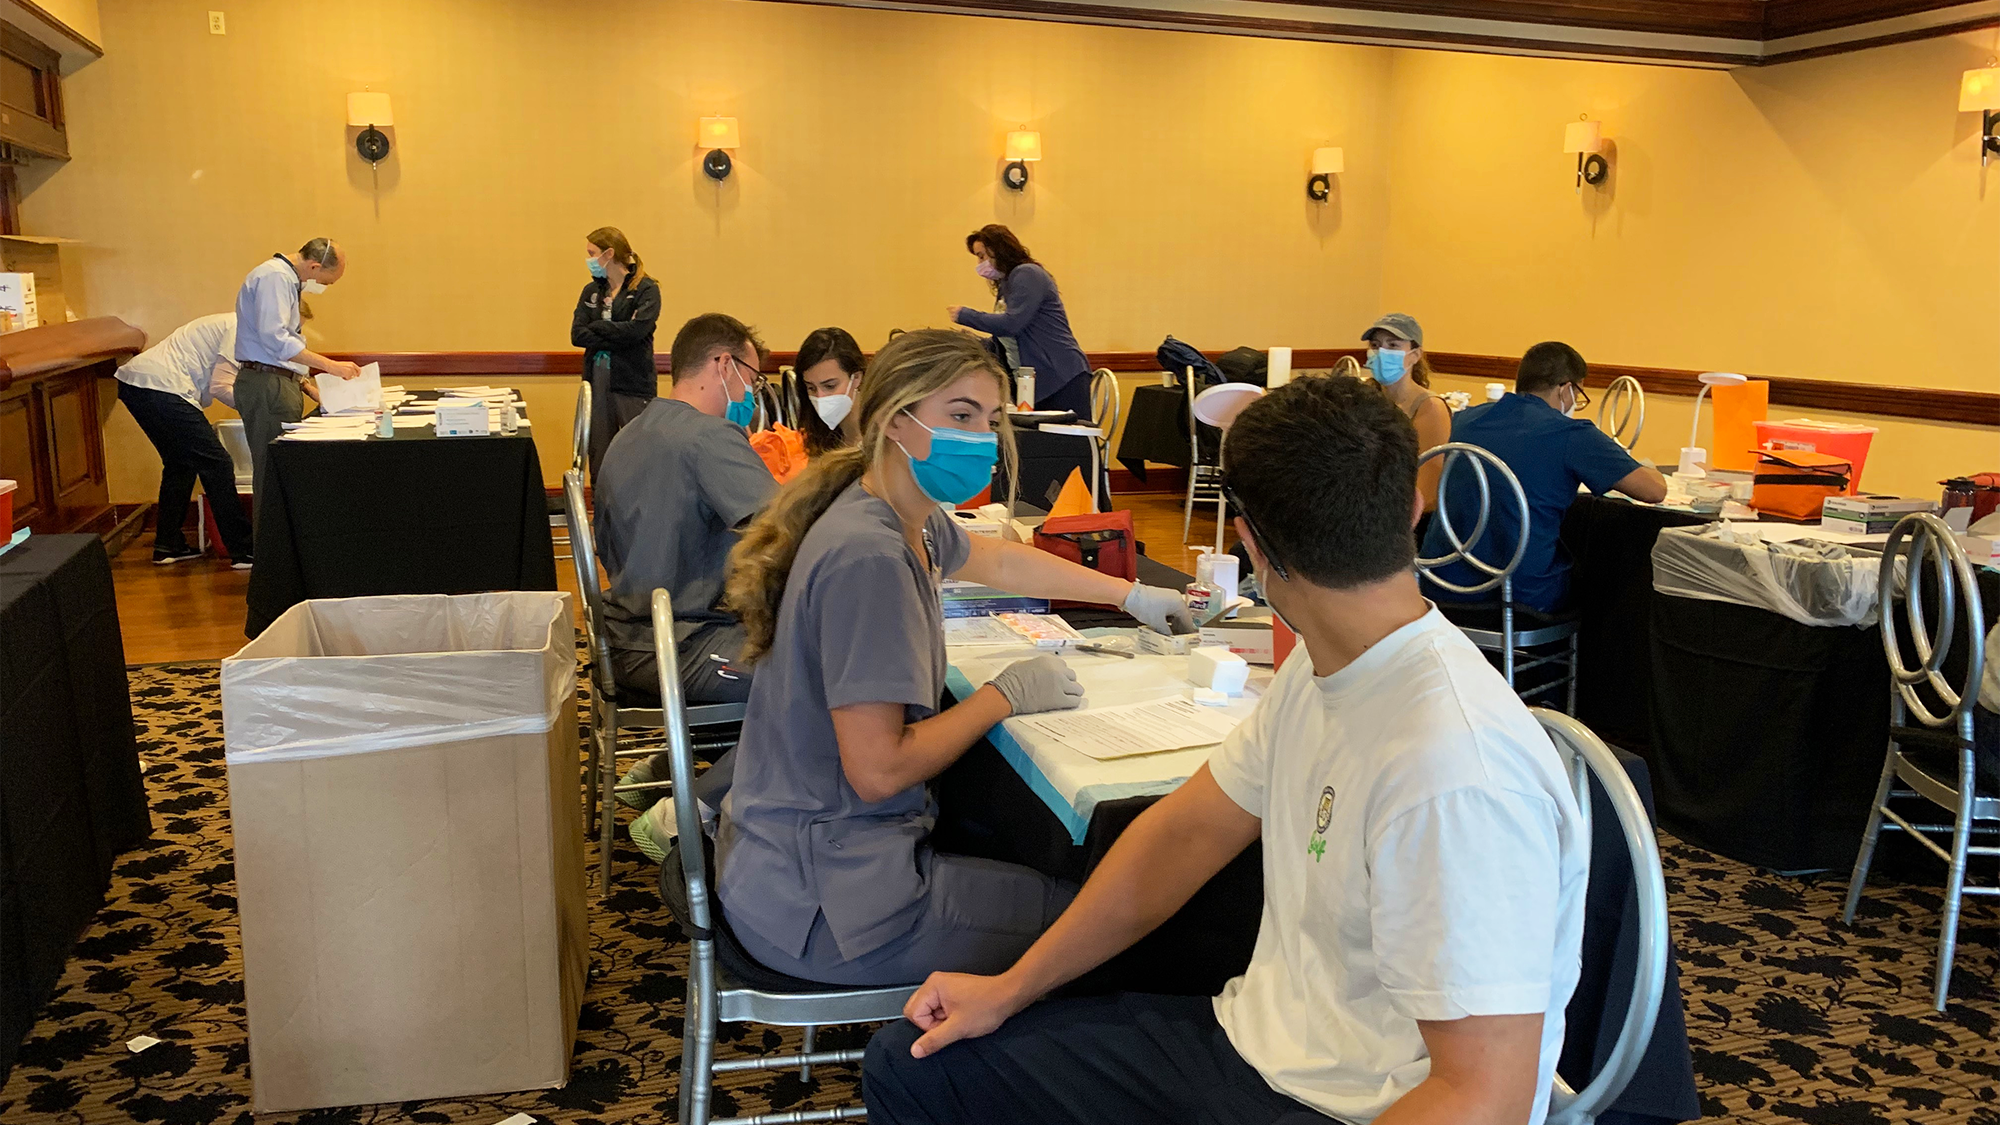 student medical personnel sit at tables and administer vaccines to other students